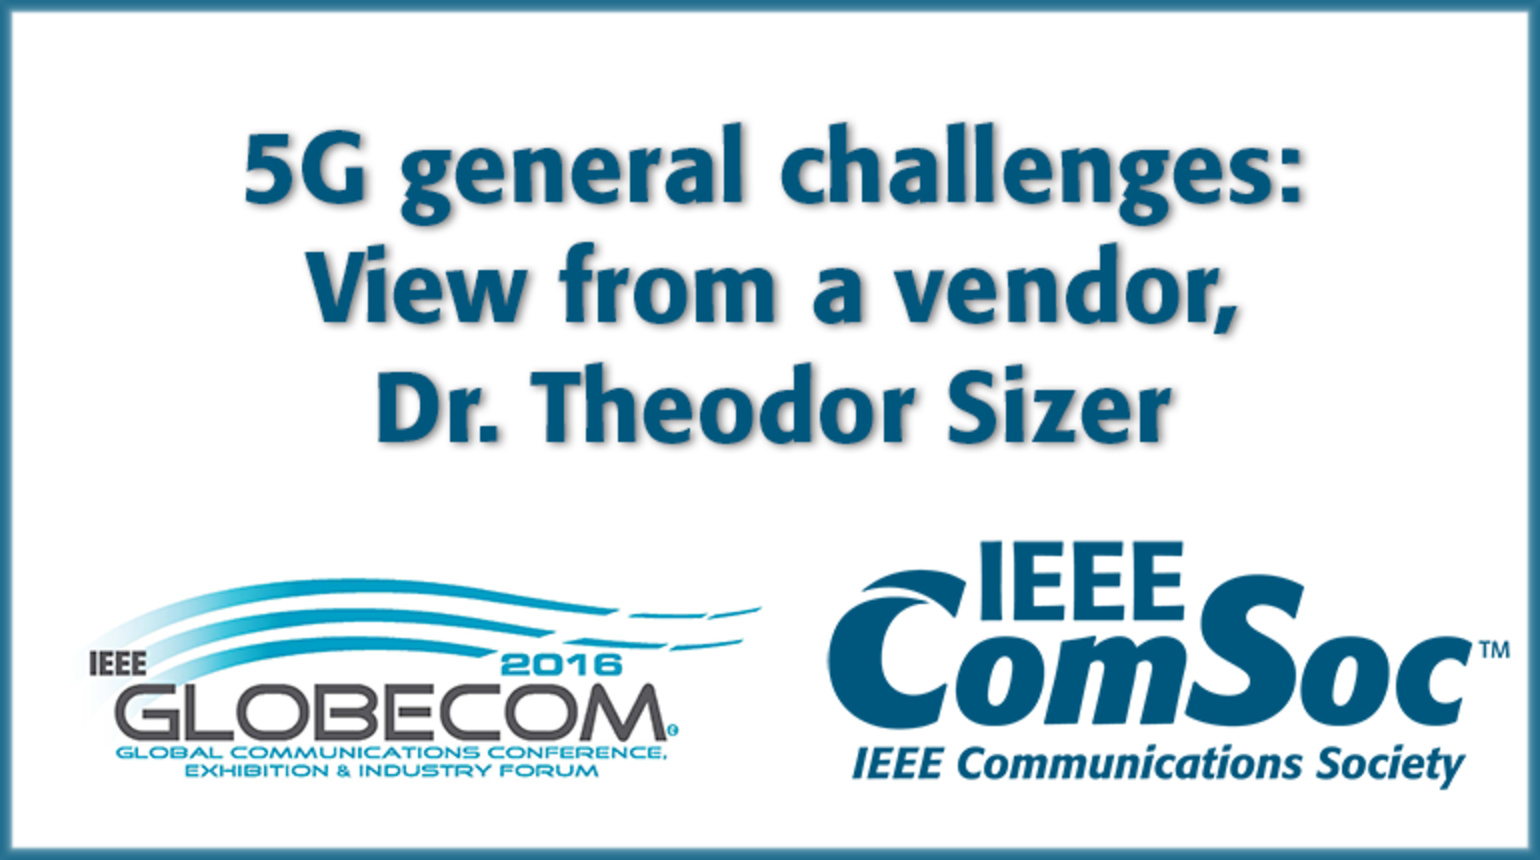 5G general challenges: View from a vendor, Dr. Theodor Sizer